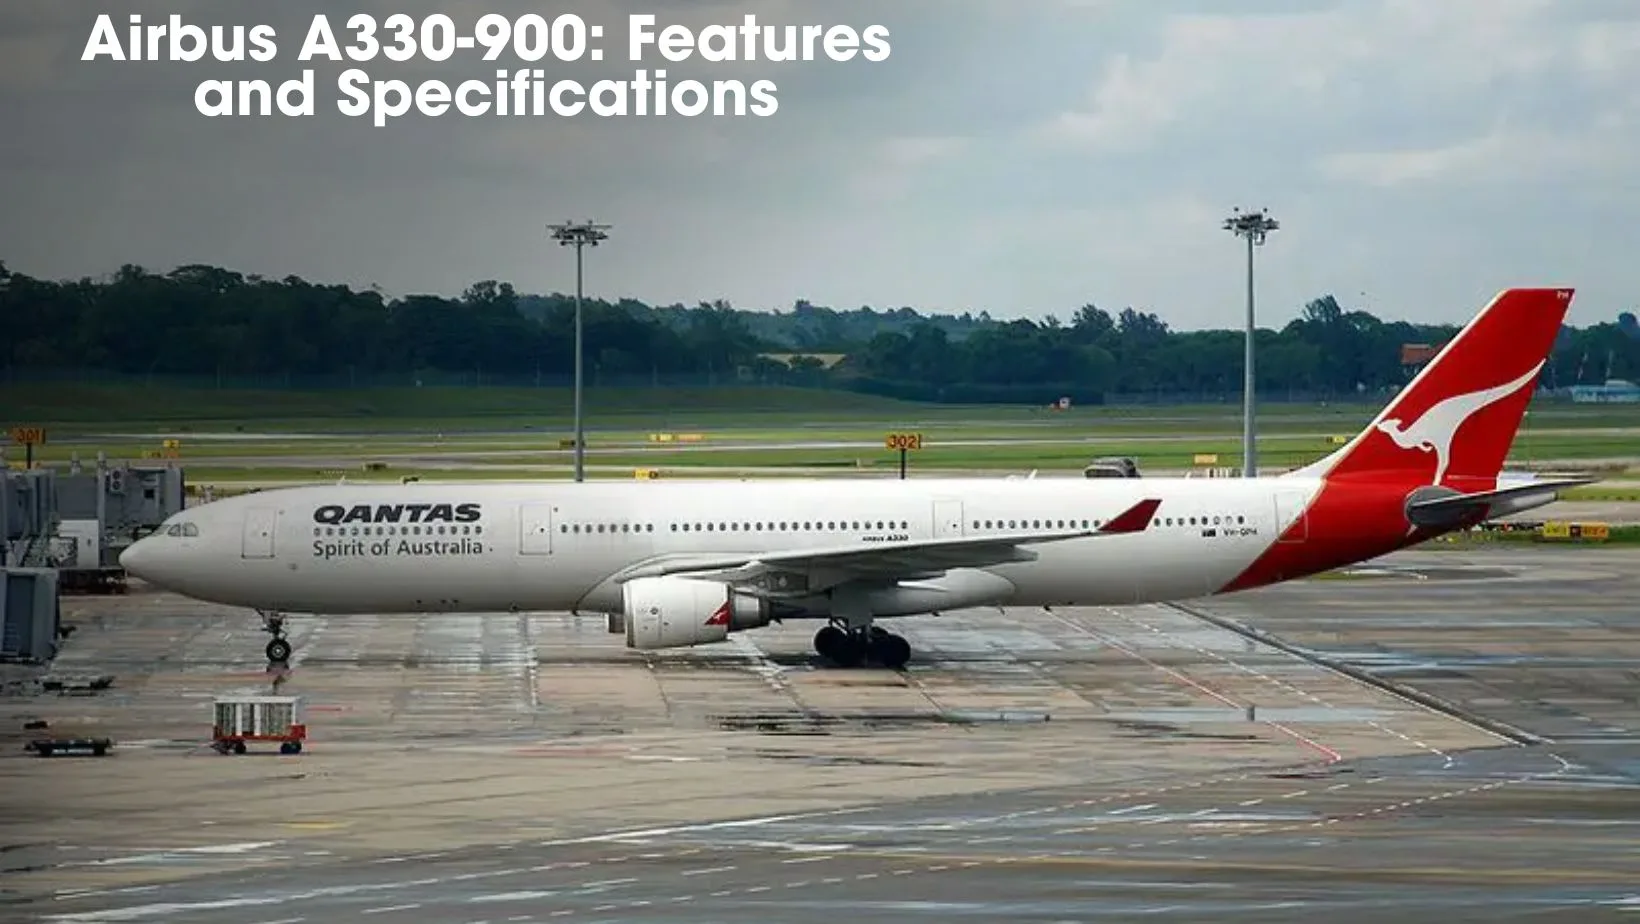 Inside the Airbus A330-900: Features and Specifications